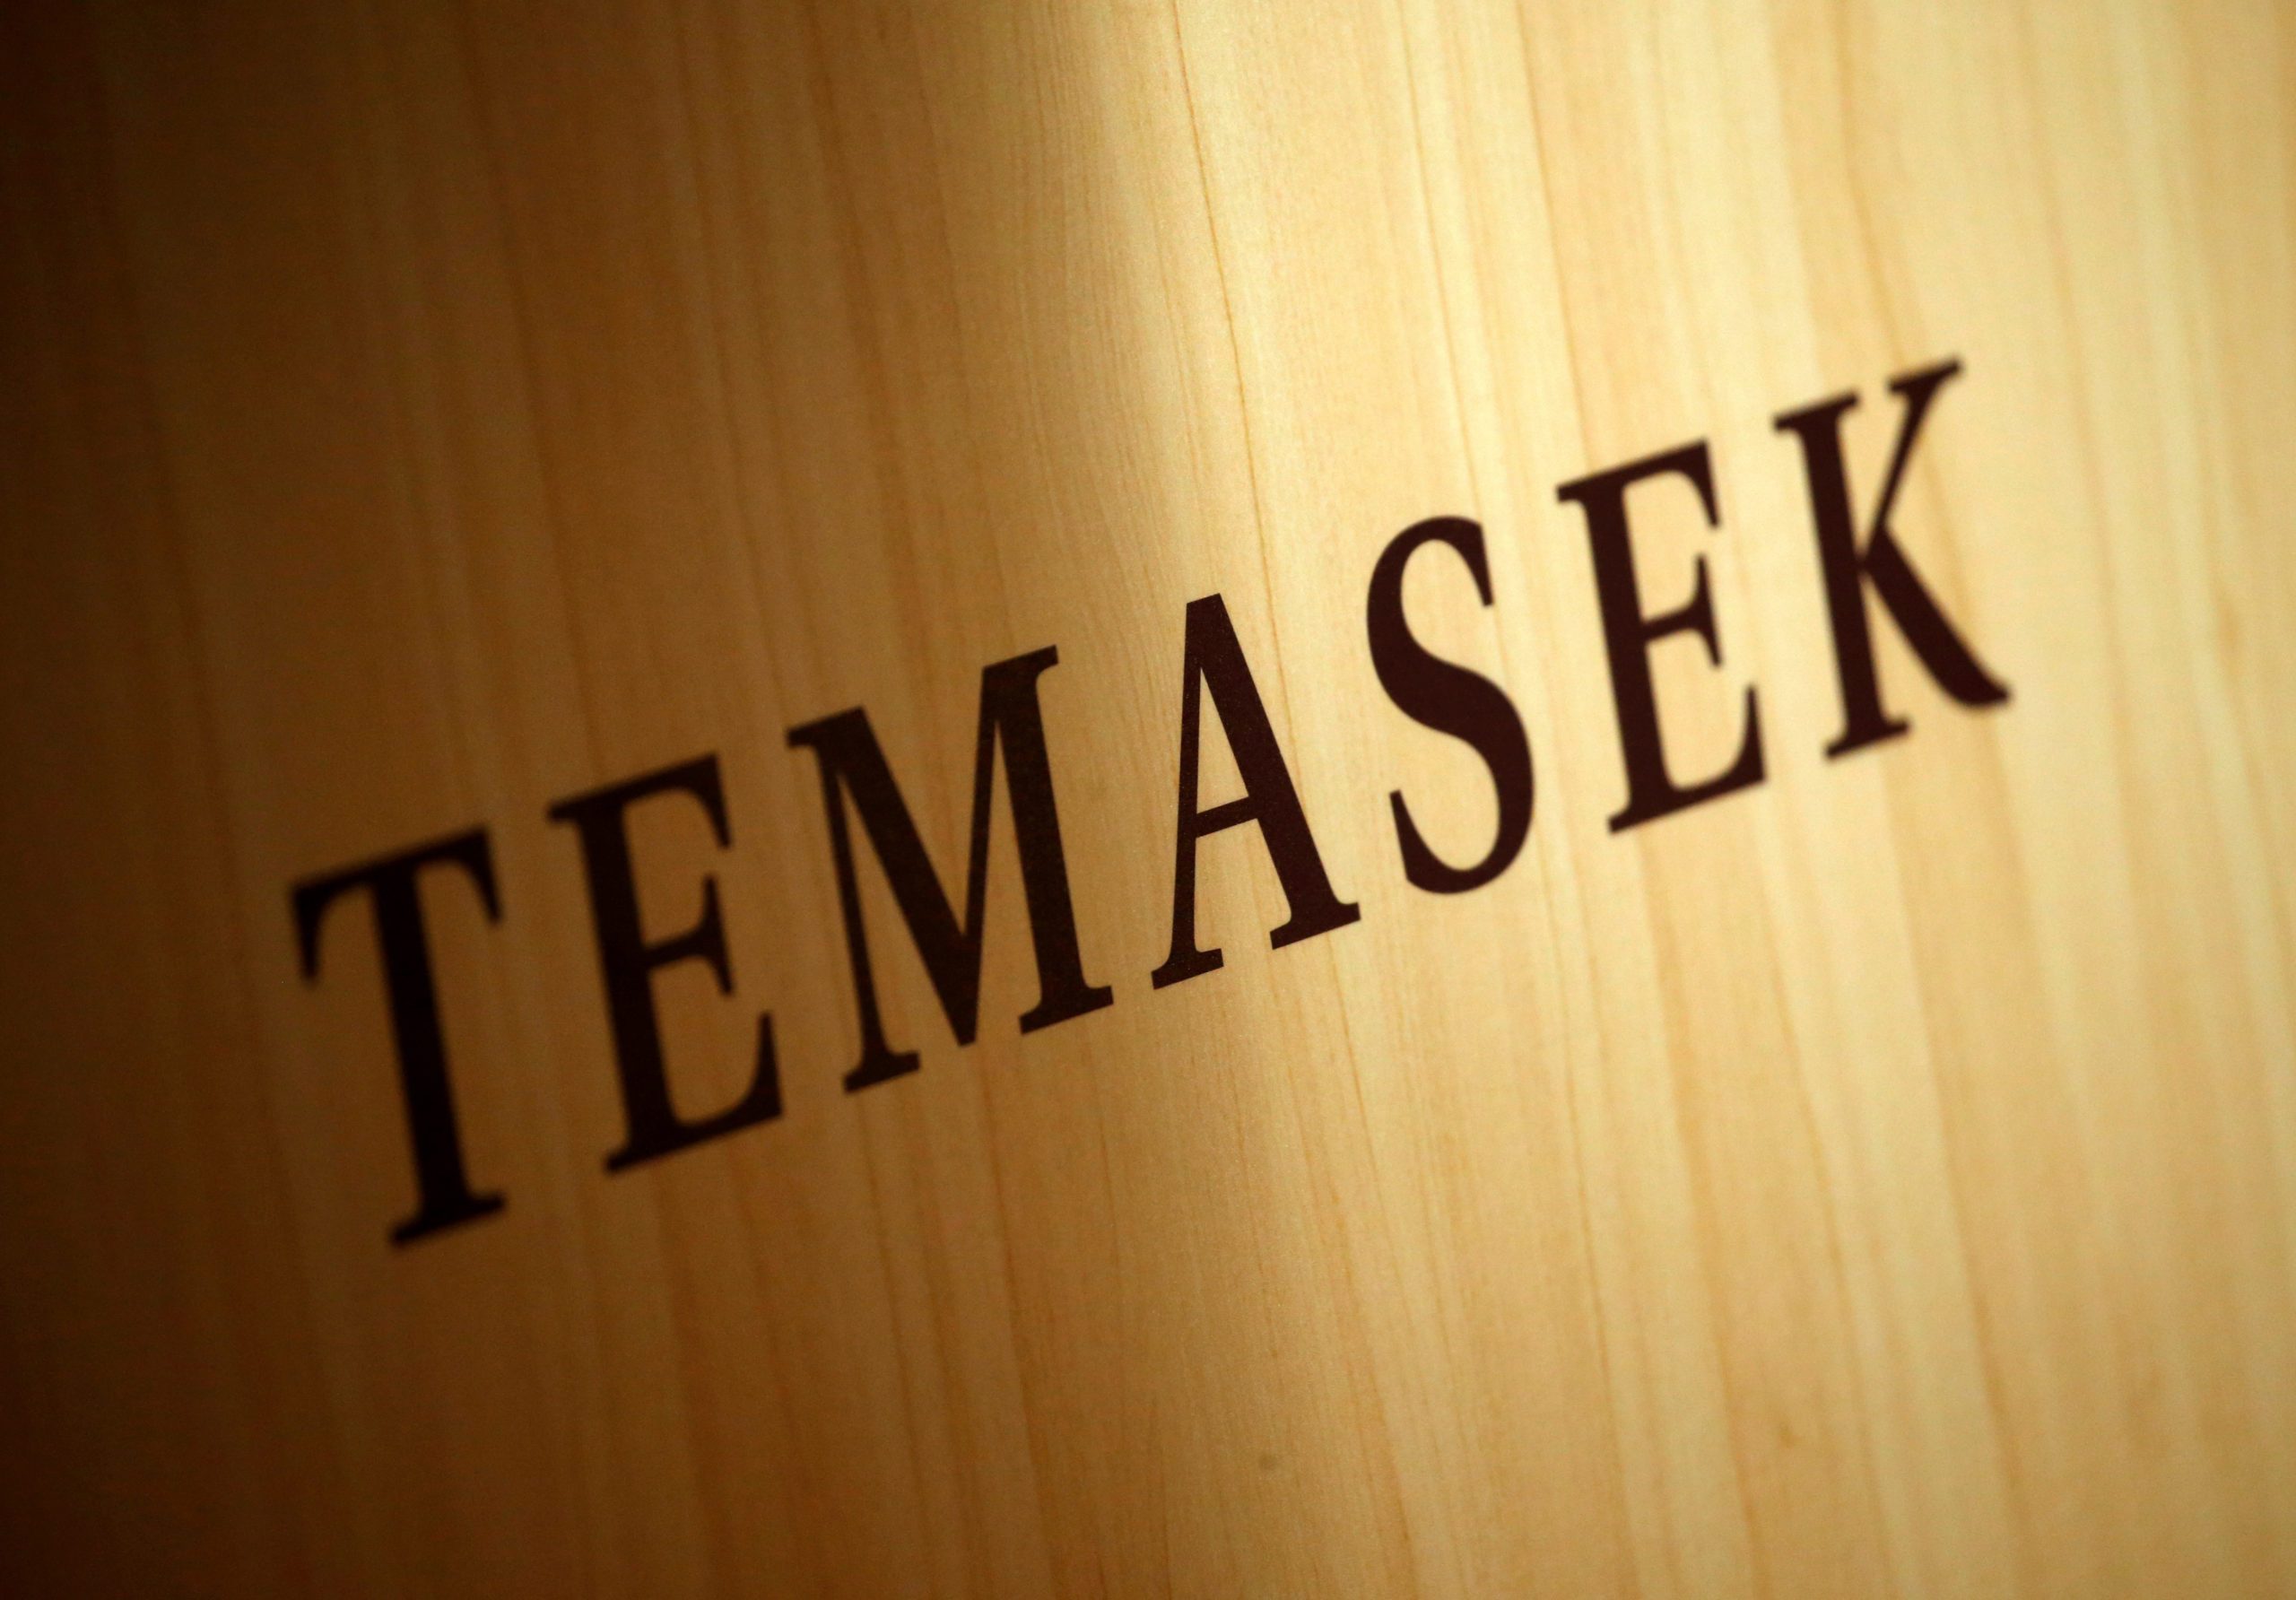 Temasek to launch dual tranche offering of 4-year and 10-year Euro bonds 